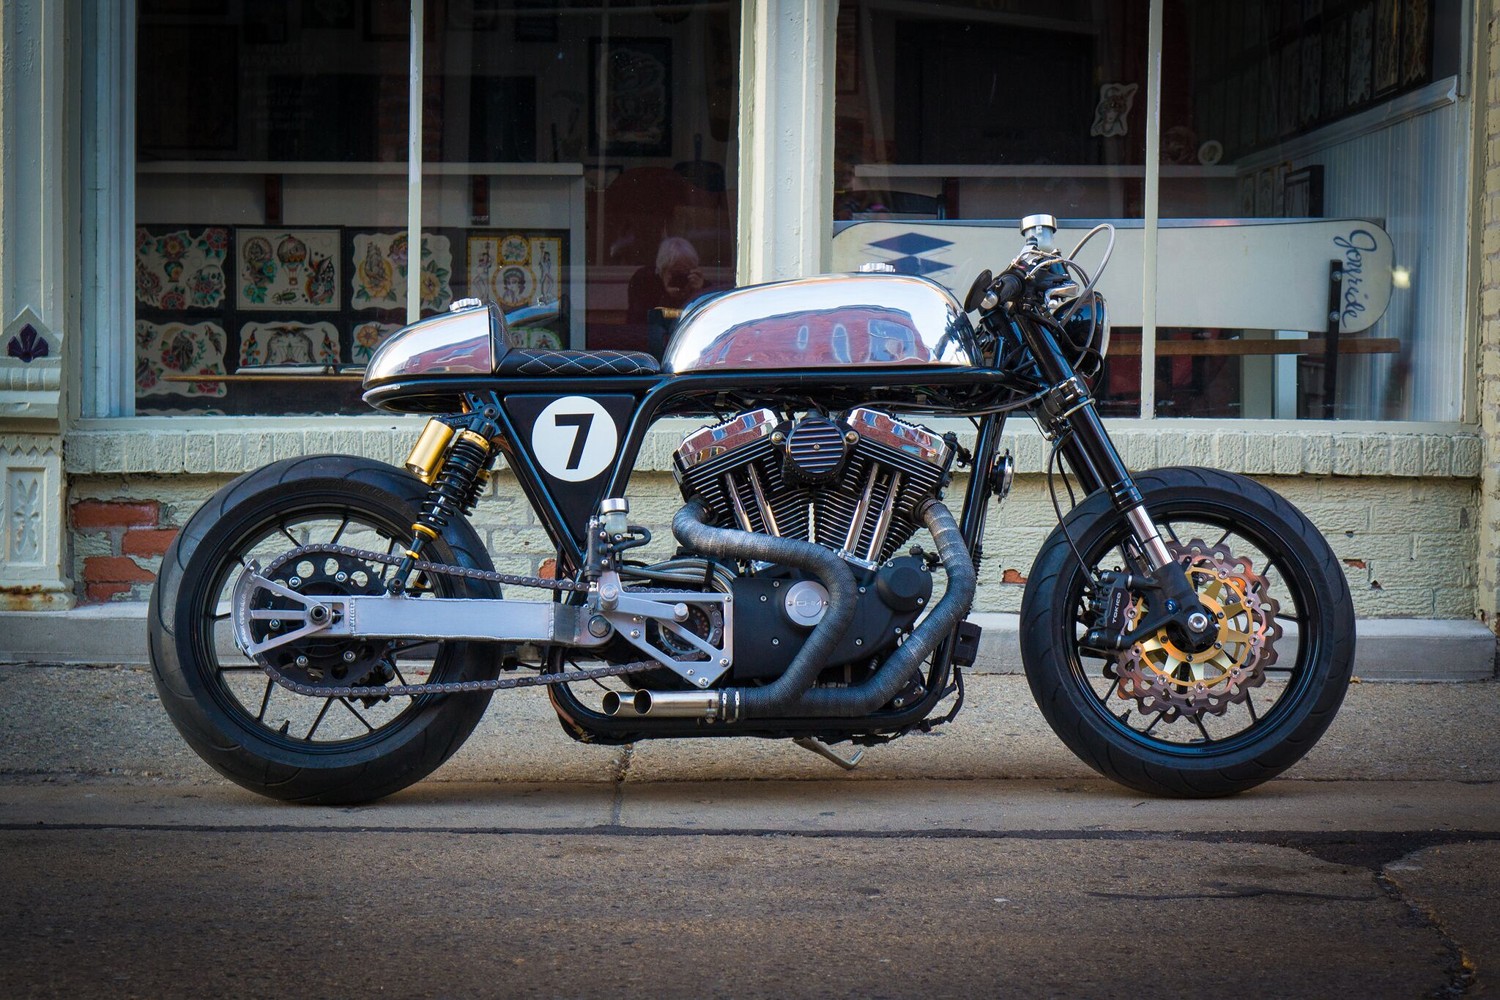 How to build a Harley cafe racer